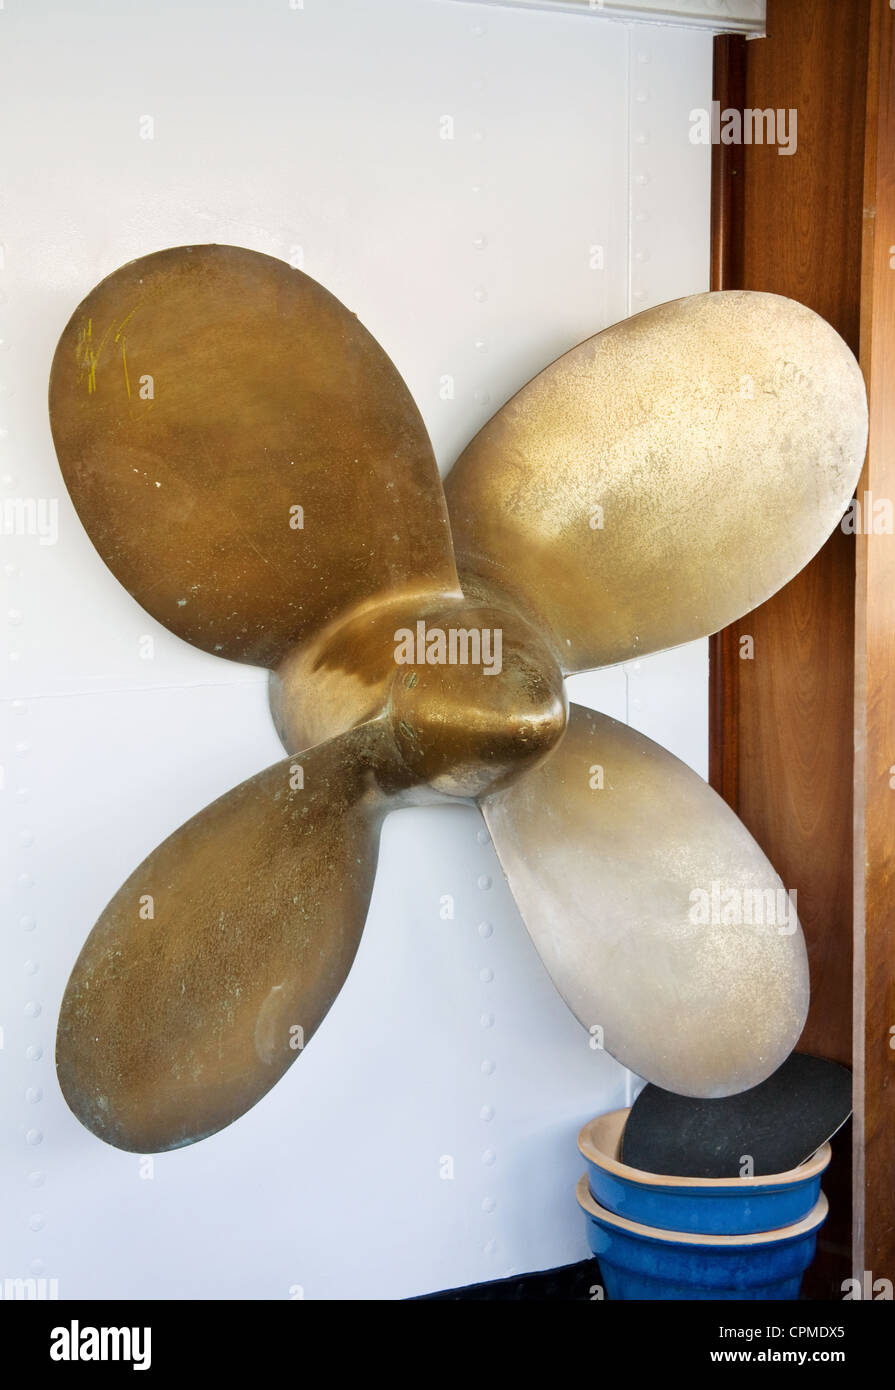 The propeller of a ship, displayed on a boat. Stock Photo